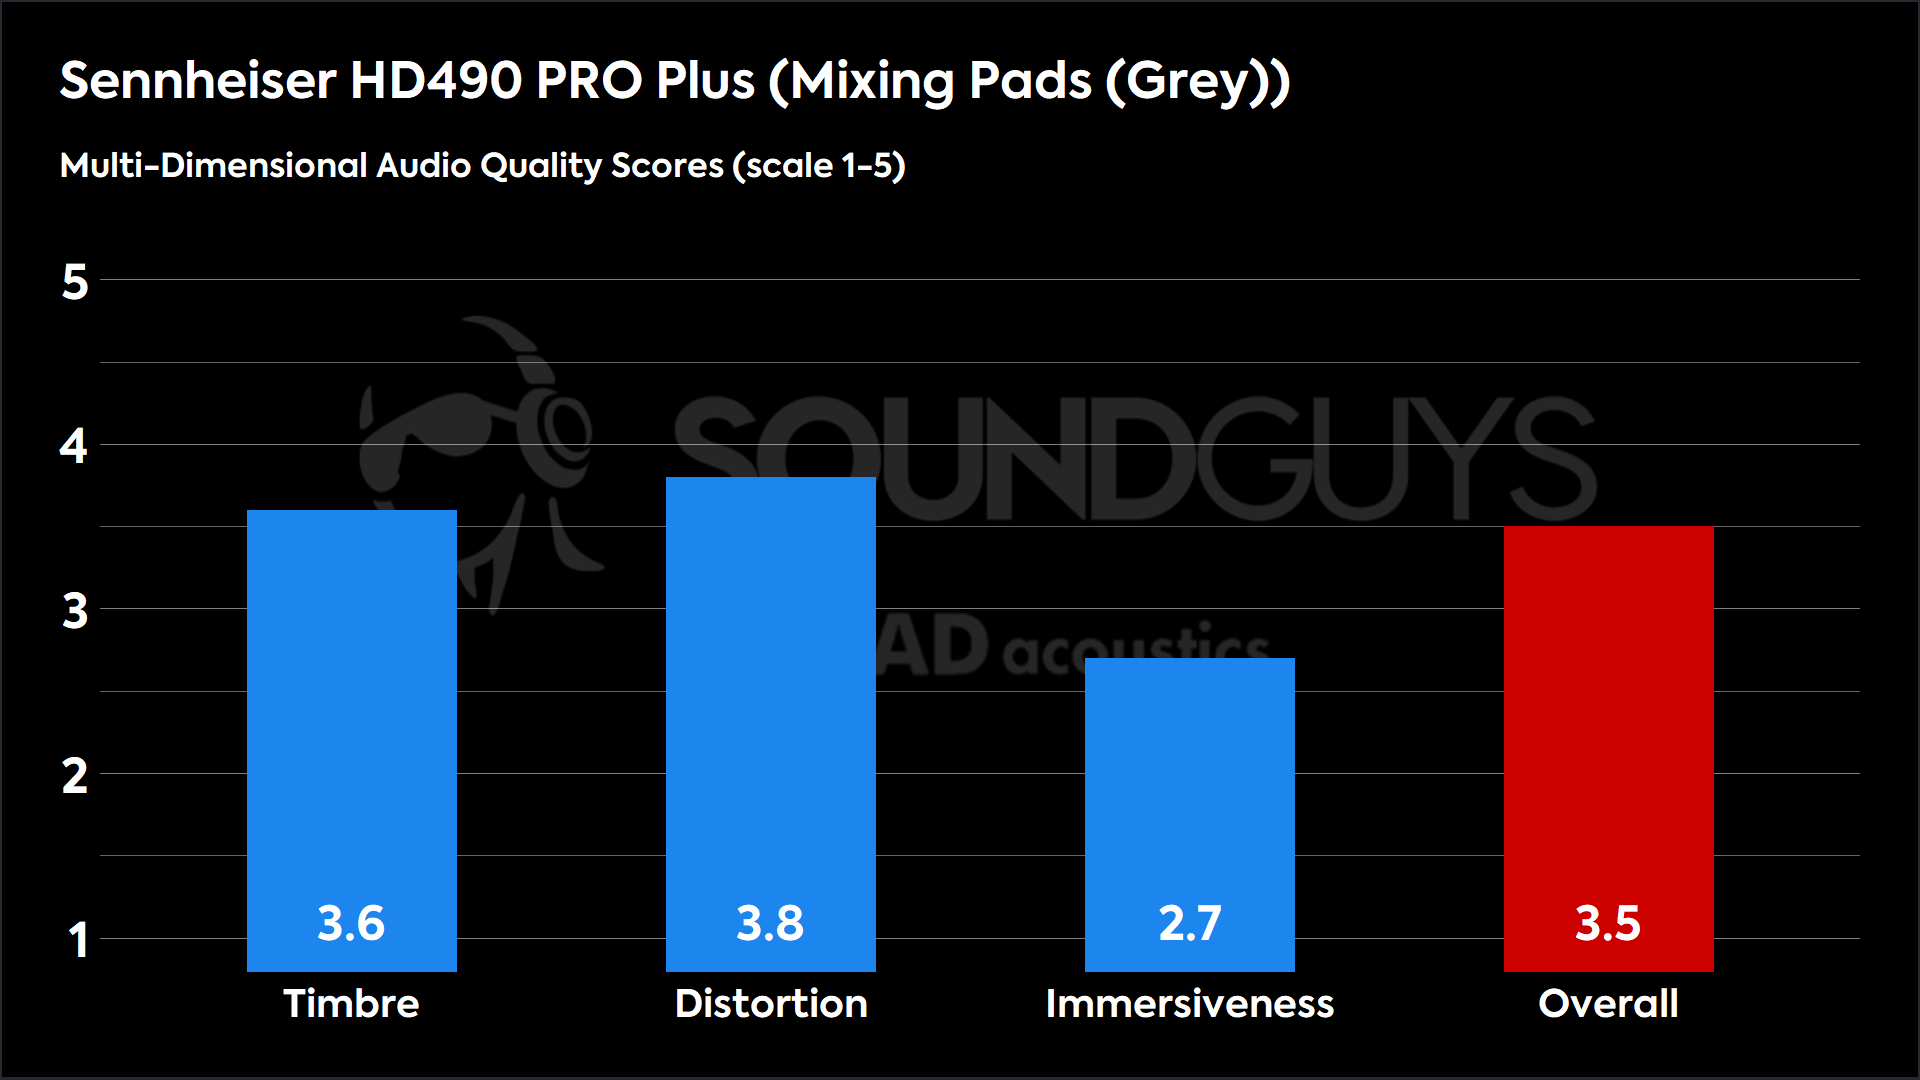 This chart shows the MDAQS results for the Sennheiser HD 490 PRO Plus in Mixing Pads (Grey) mode. The Timbre score is 3.6, The Distortion score is 3.8, the Immersiveness score is 2.7, and the Overall Score is 3.5).